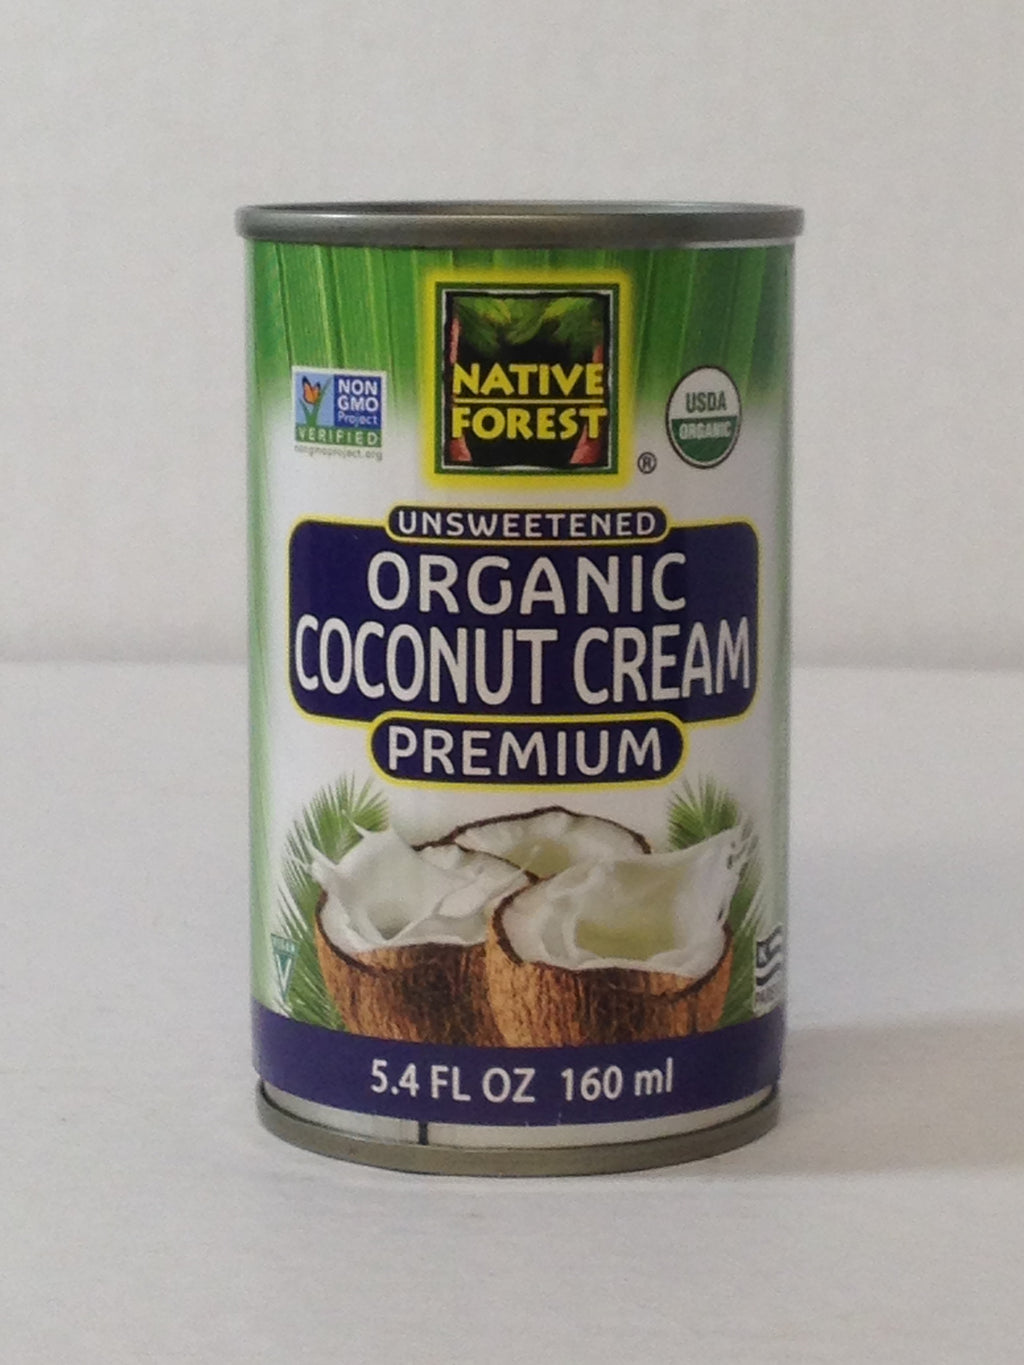 Small green and blue can containing 160 millilitres of unsweetened, Organic Coconut Cream.  